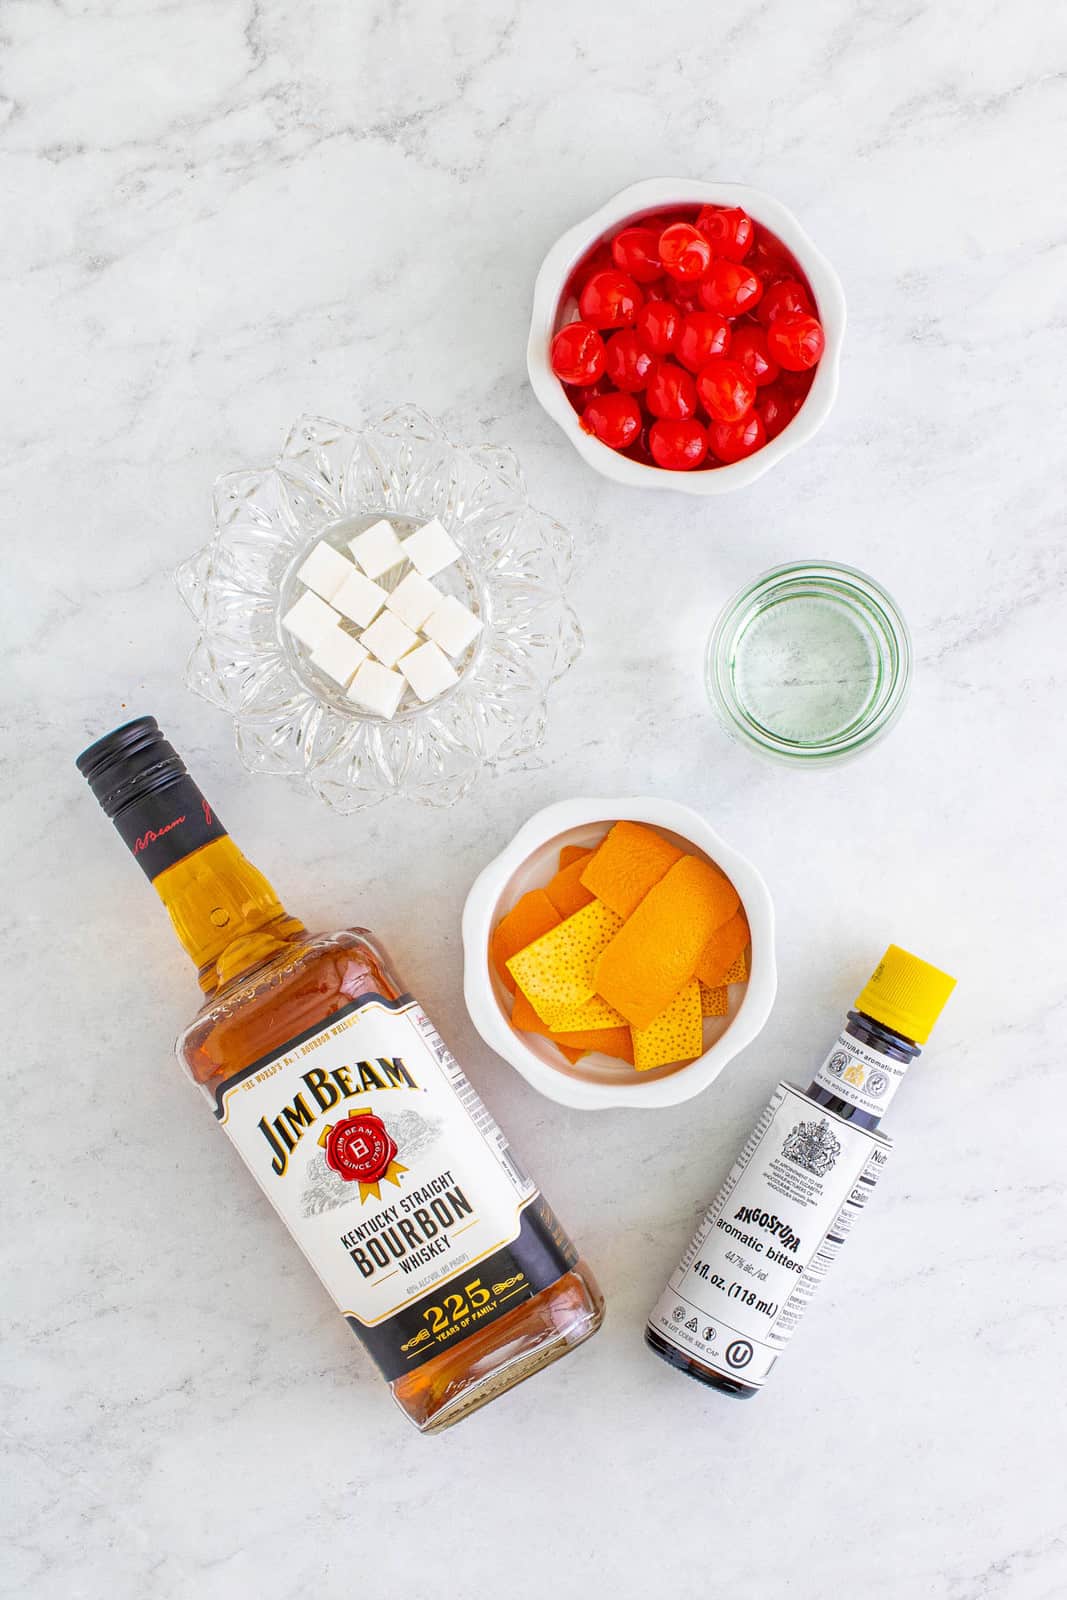 Ingredients needed to make an Old Fashioned Cocktail.